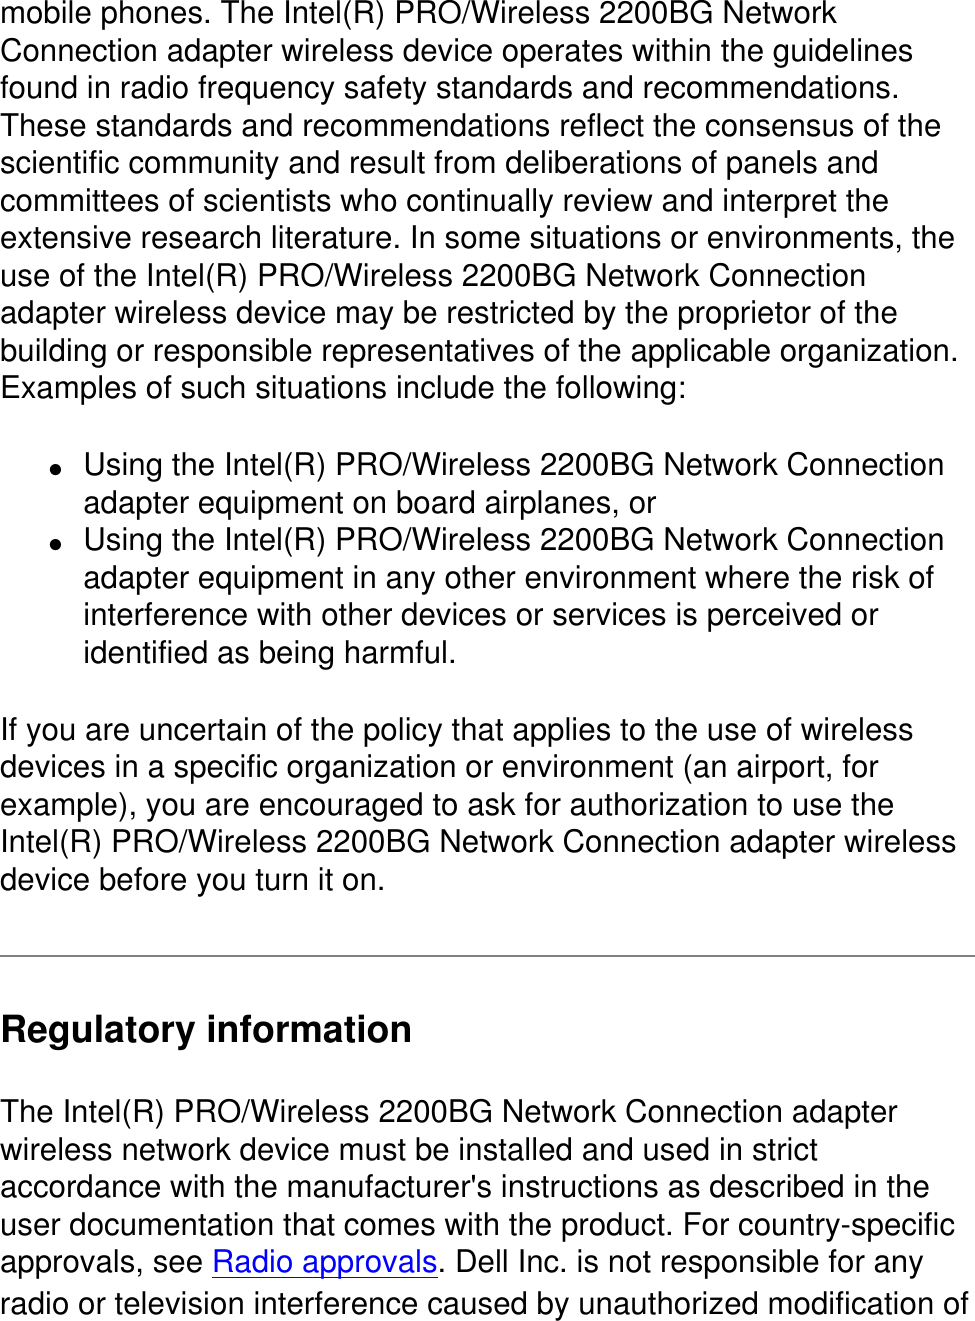 mobile phones. The Intel(R) PRO/Wireless 2200BG Network Connection adapter wireless device operates within the guidelines found in radio frequency safety standards and recommendations. These standards and recommendations reflect the consensus of the scientific community and result from deliberations of panels and committees of scientists who continually review and interpret the extensive research literature. In some situations or environments, the use of the Intel(R) PRO/Wireless 2200BG Network Connection adapter wireless device may be restricted by the proprietor of the building or responsible representatives of the applicable organization. Examples of such situations include the following:●     Using the Intel(R) PRO/Wireless 2200BG Network Connection adapter equipment on board airplanes, or ●     Using the Intel(R) PRO/Wireless 2200BG Network Connection adapter equipment in any other environment where the risk of interference with other devices or services is perceived or identified as being harmful.If you are uncertain of the policy that applies to the use of wireless devices in a specific organization or environment (an airport, for example), you are encouraged to ask for authorization to use the Intel(R) PRO/Wireless 2200BG Network Connection adapter wireless device before you turn it on.Regulatory informationThe Intel(R) PRO/Wireless 2200BG Network Connection adapter wireless network device must be installed and used in strict accordance with the manufacturer&apos;s instructions as described in the user documentation that comes with the product. For country-specific approvals, see Radio approvals. Dell Inc. is not responsible for any radio or television interference caused by unauthorized modification of 